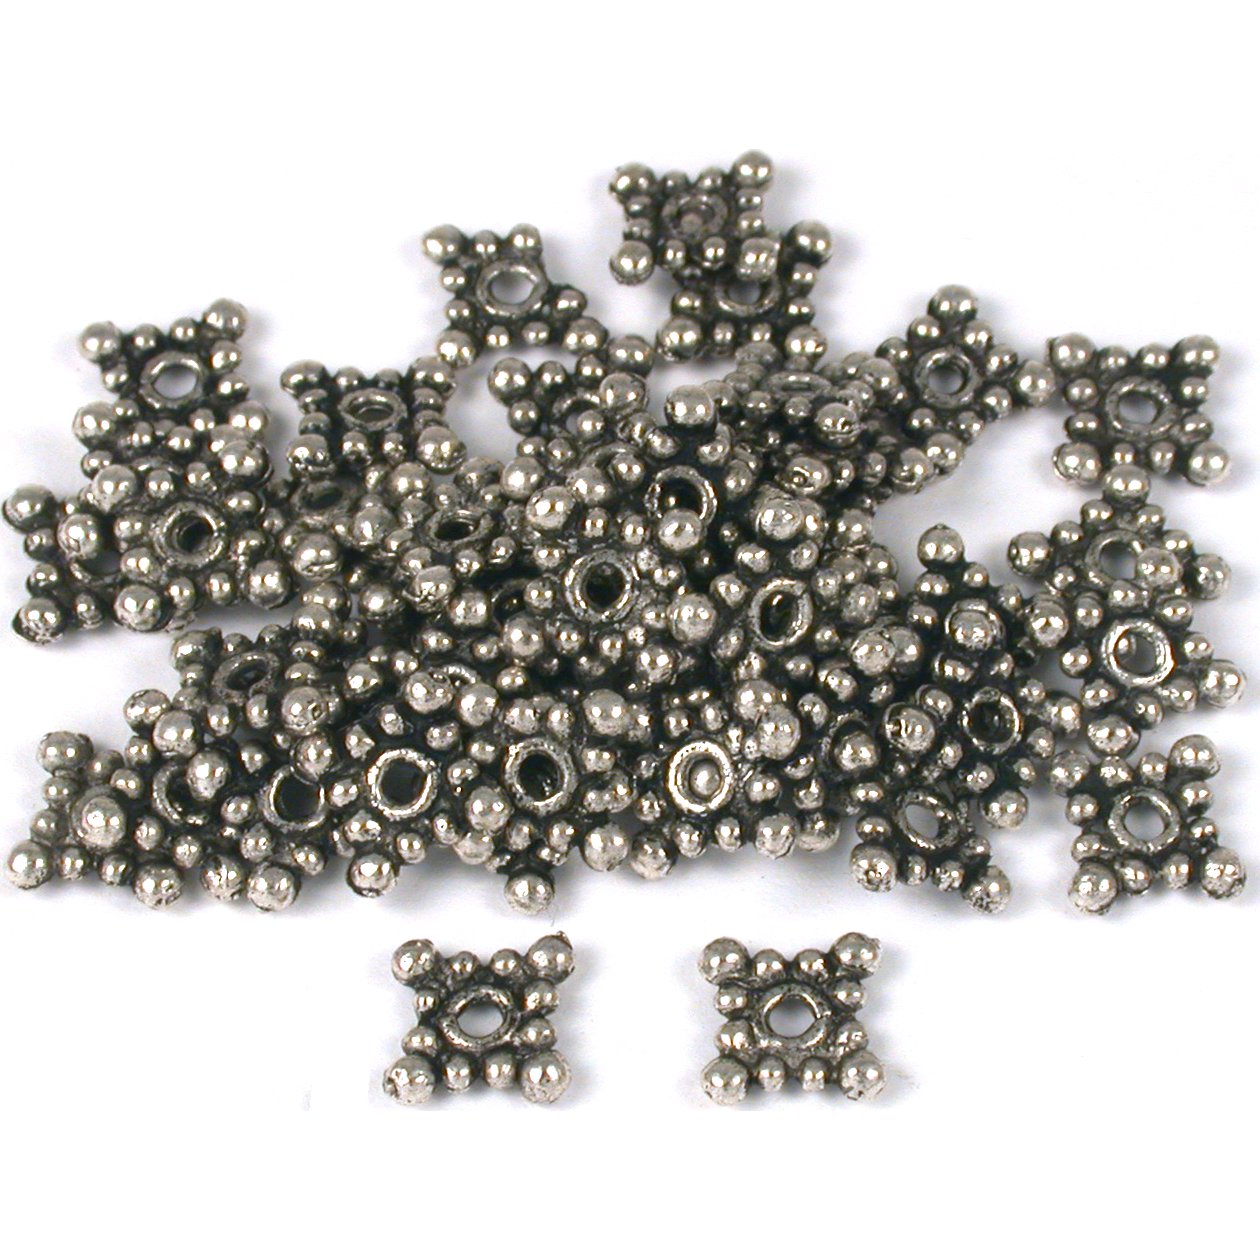 Bali Spacer Square Beads Antique Silver Plated 8mm 50Pcs Approx.